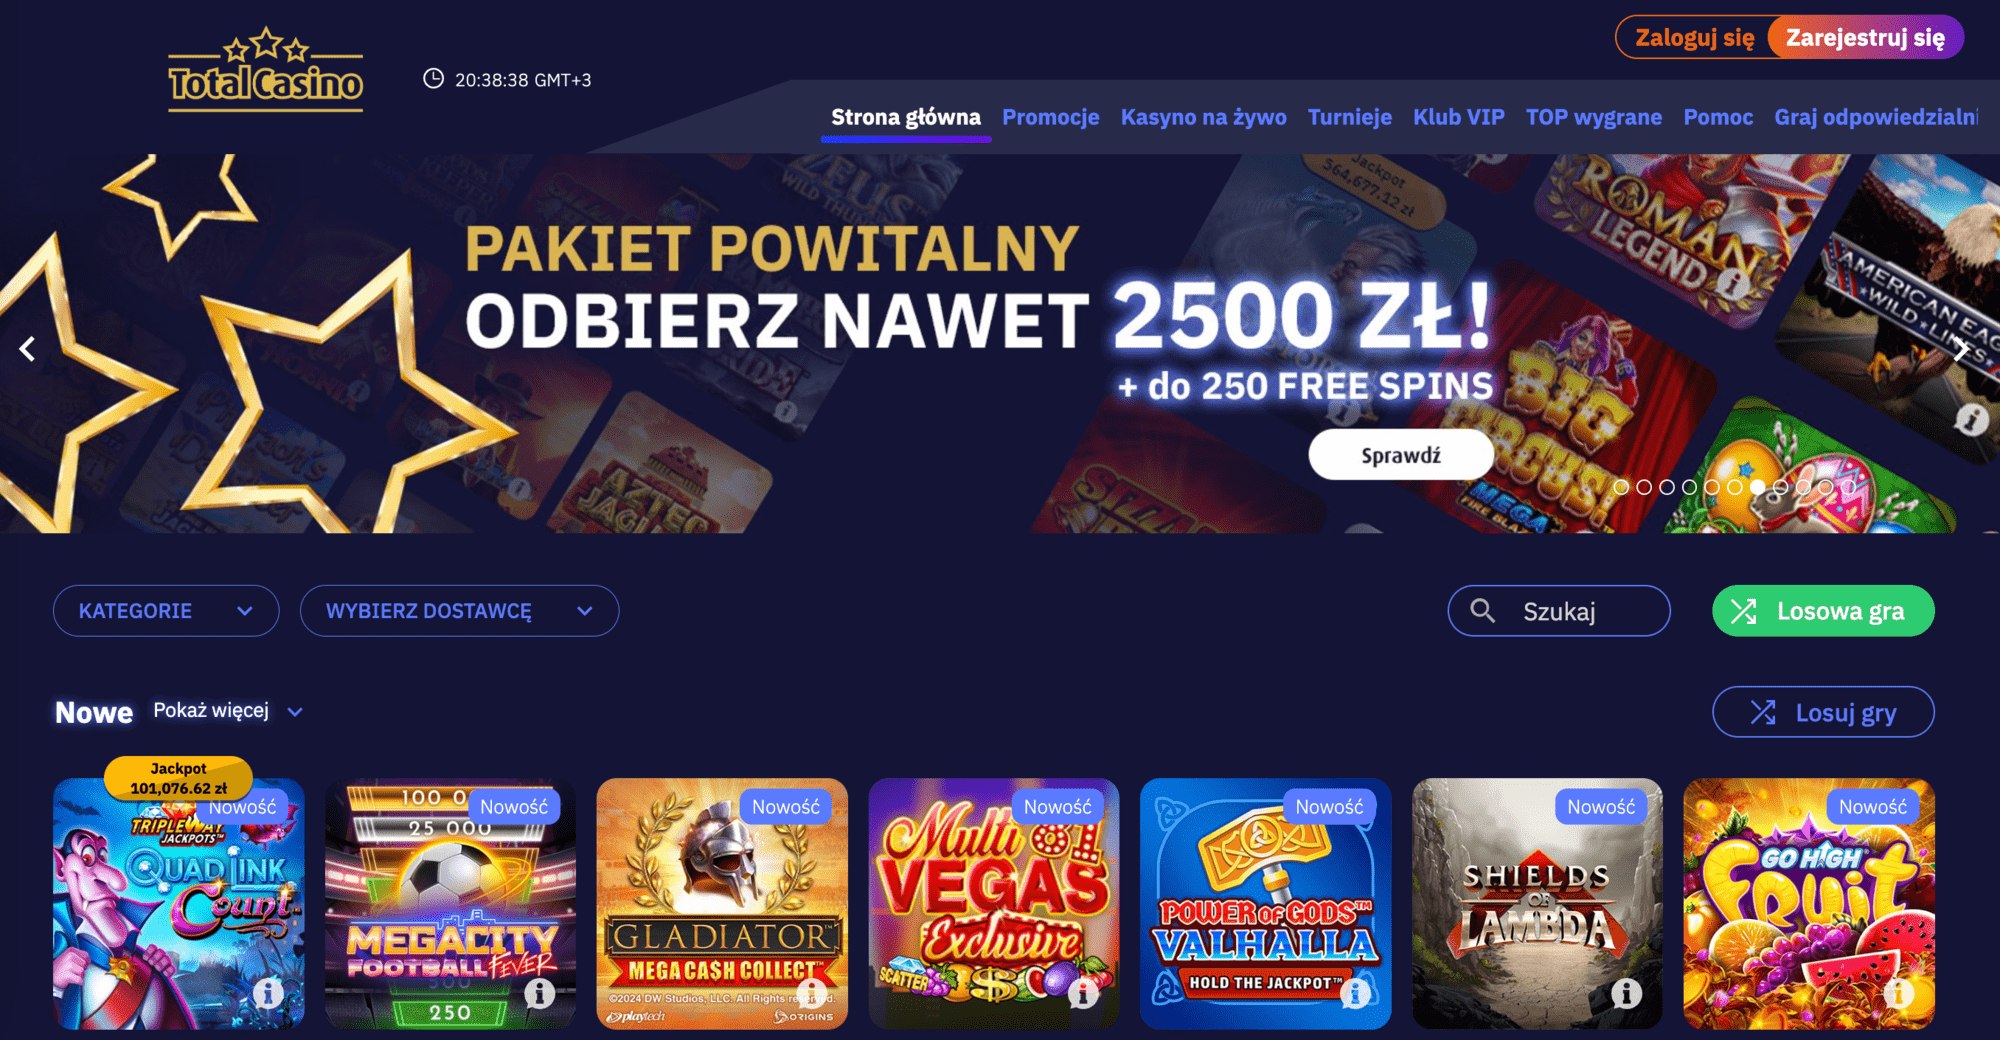 Total Casino homepage of the website